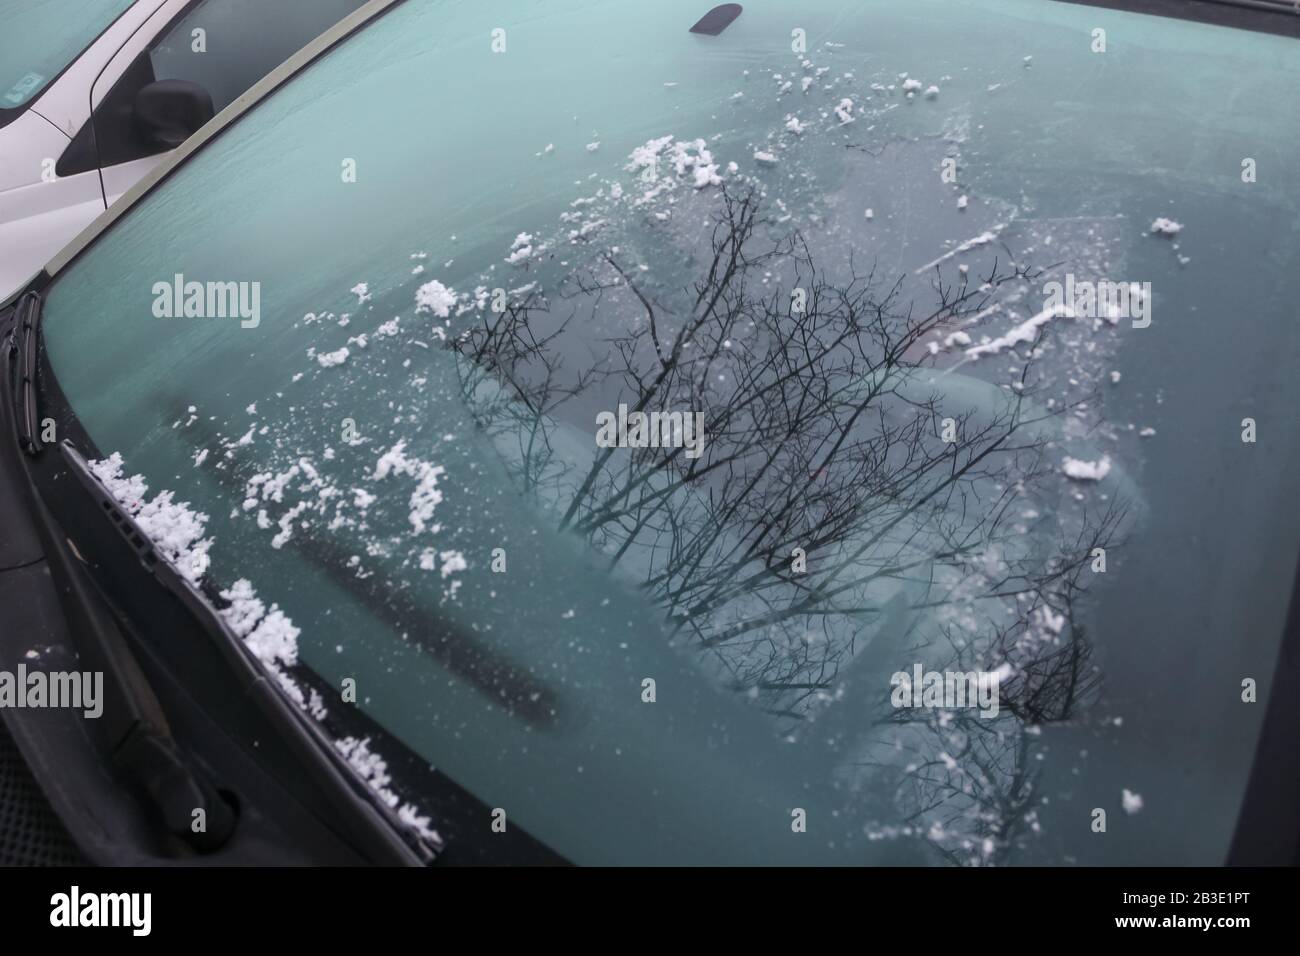 20 Spray To Defrost Windshield Images, Stock Photos, 3D objects